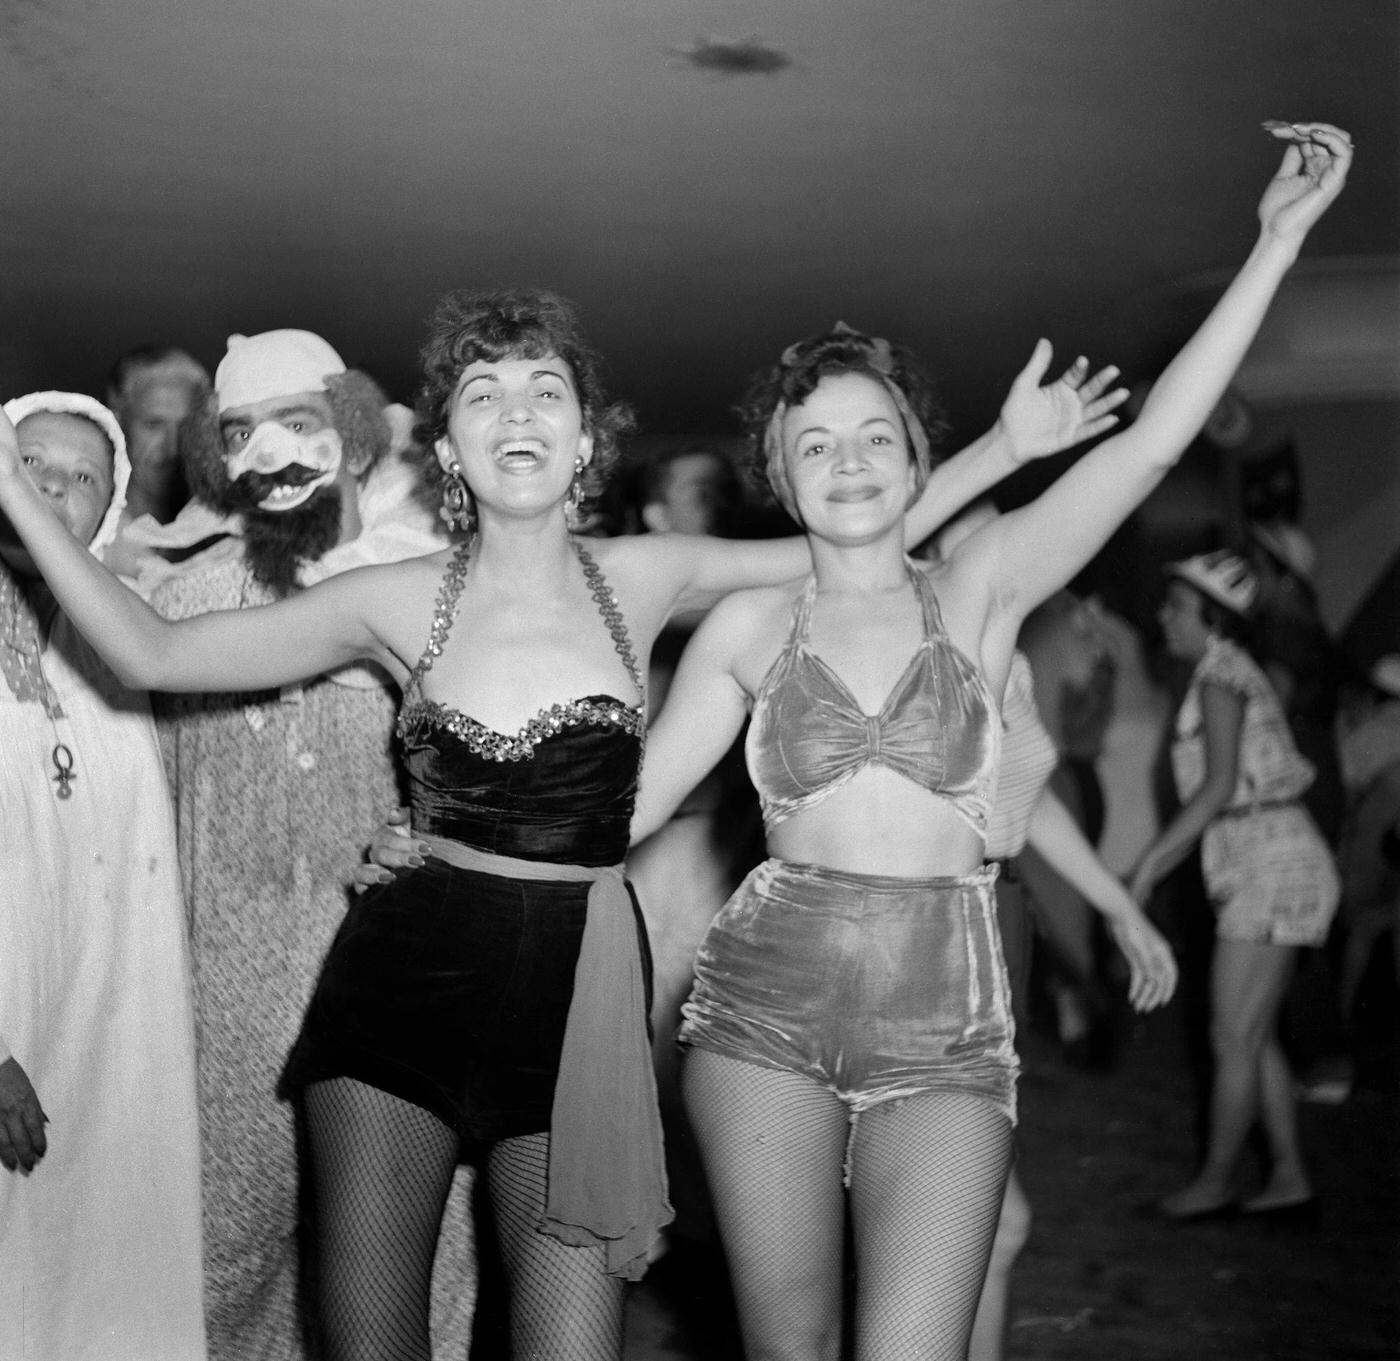 Carnival parade revelers pose at a party in Rio de Janeiro's Carnival. 1953